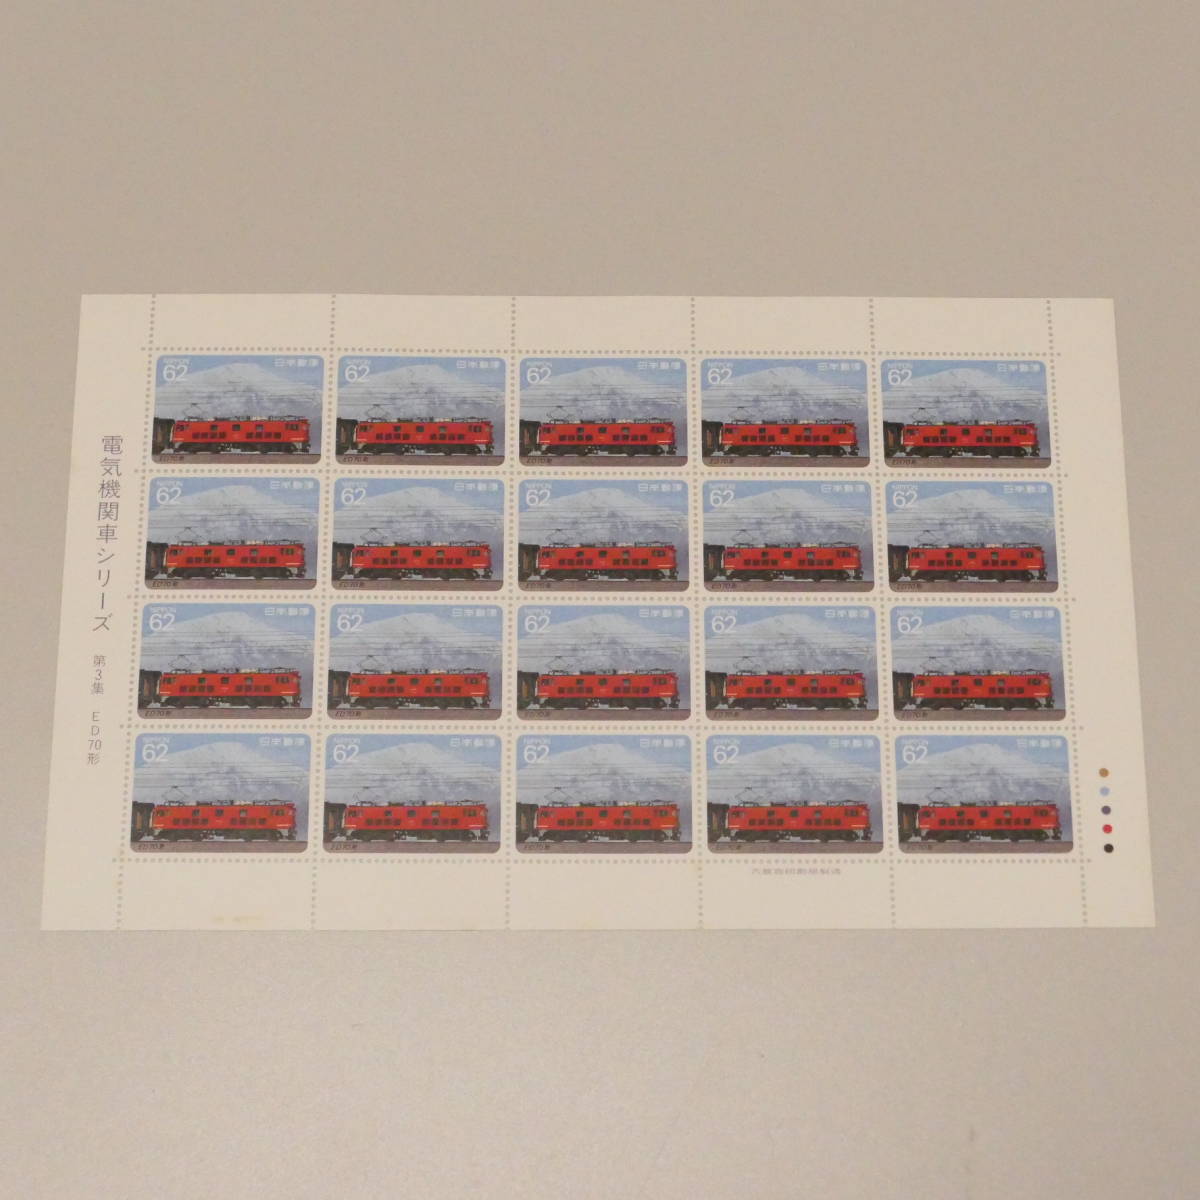  stamp 1990 year Heisei era 02 year 04 month 23 day electric locomotive series no. 3 compilation ED70 shape 62 jpy 20 sheets 1 seat 